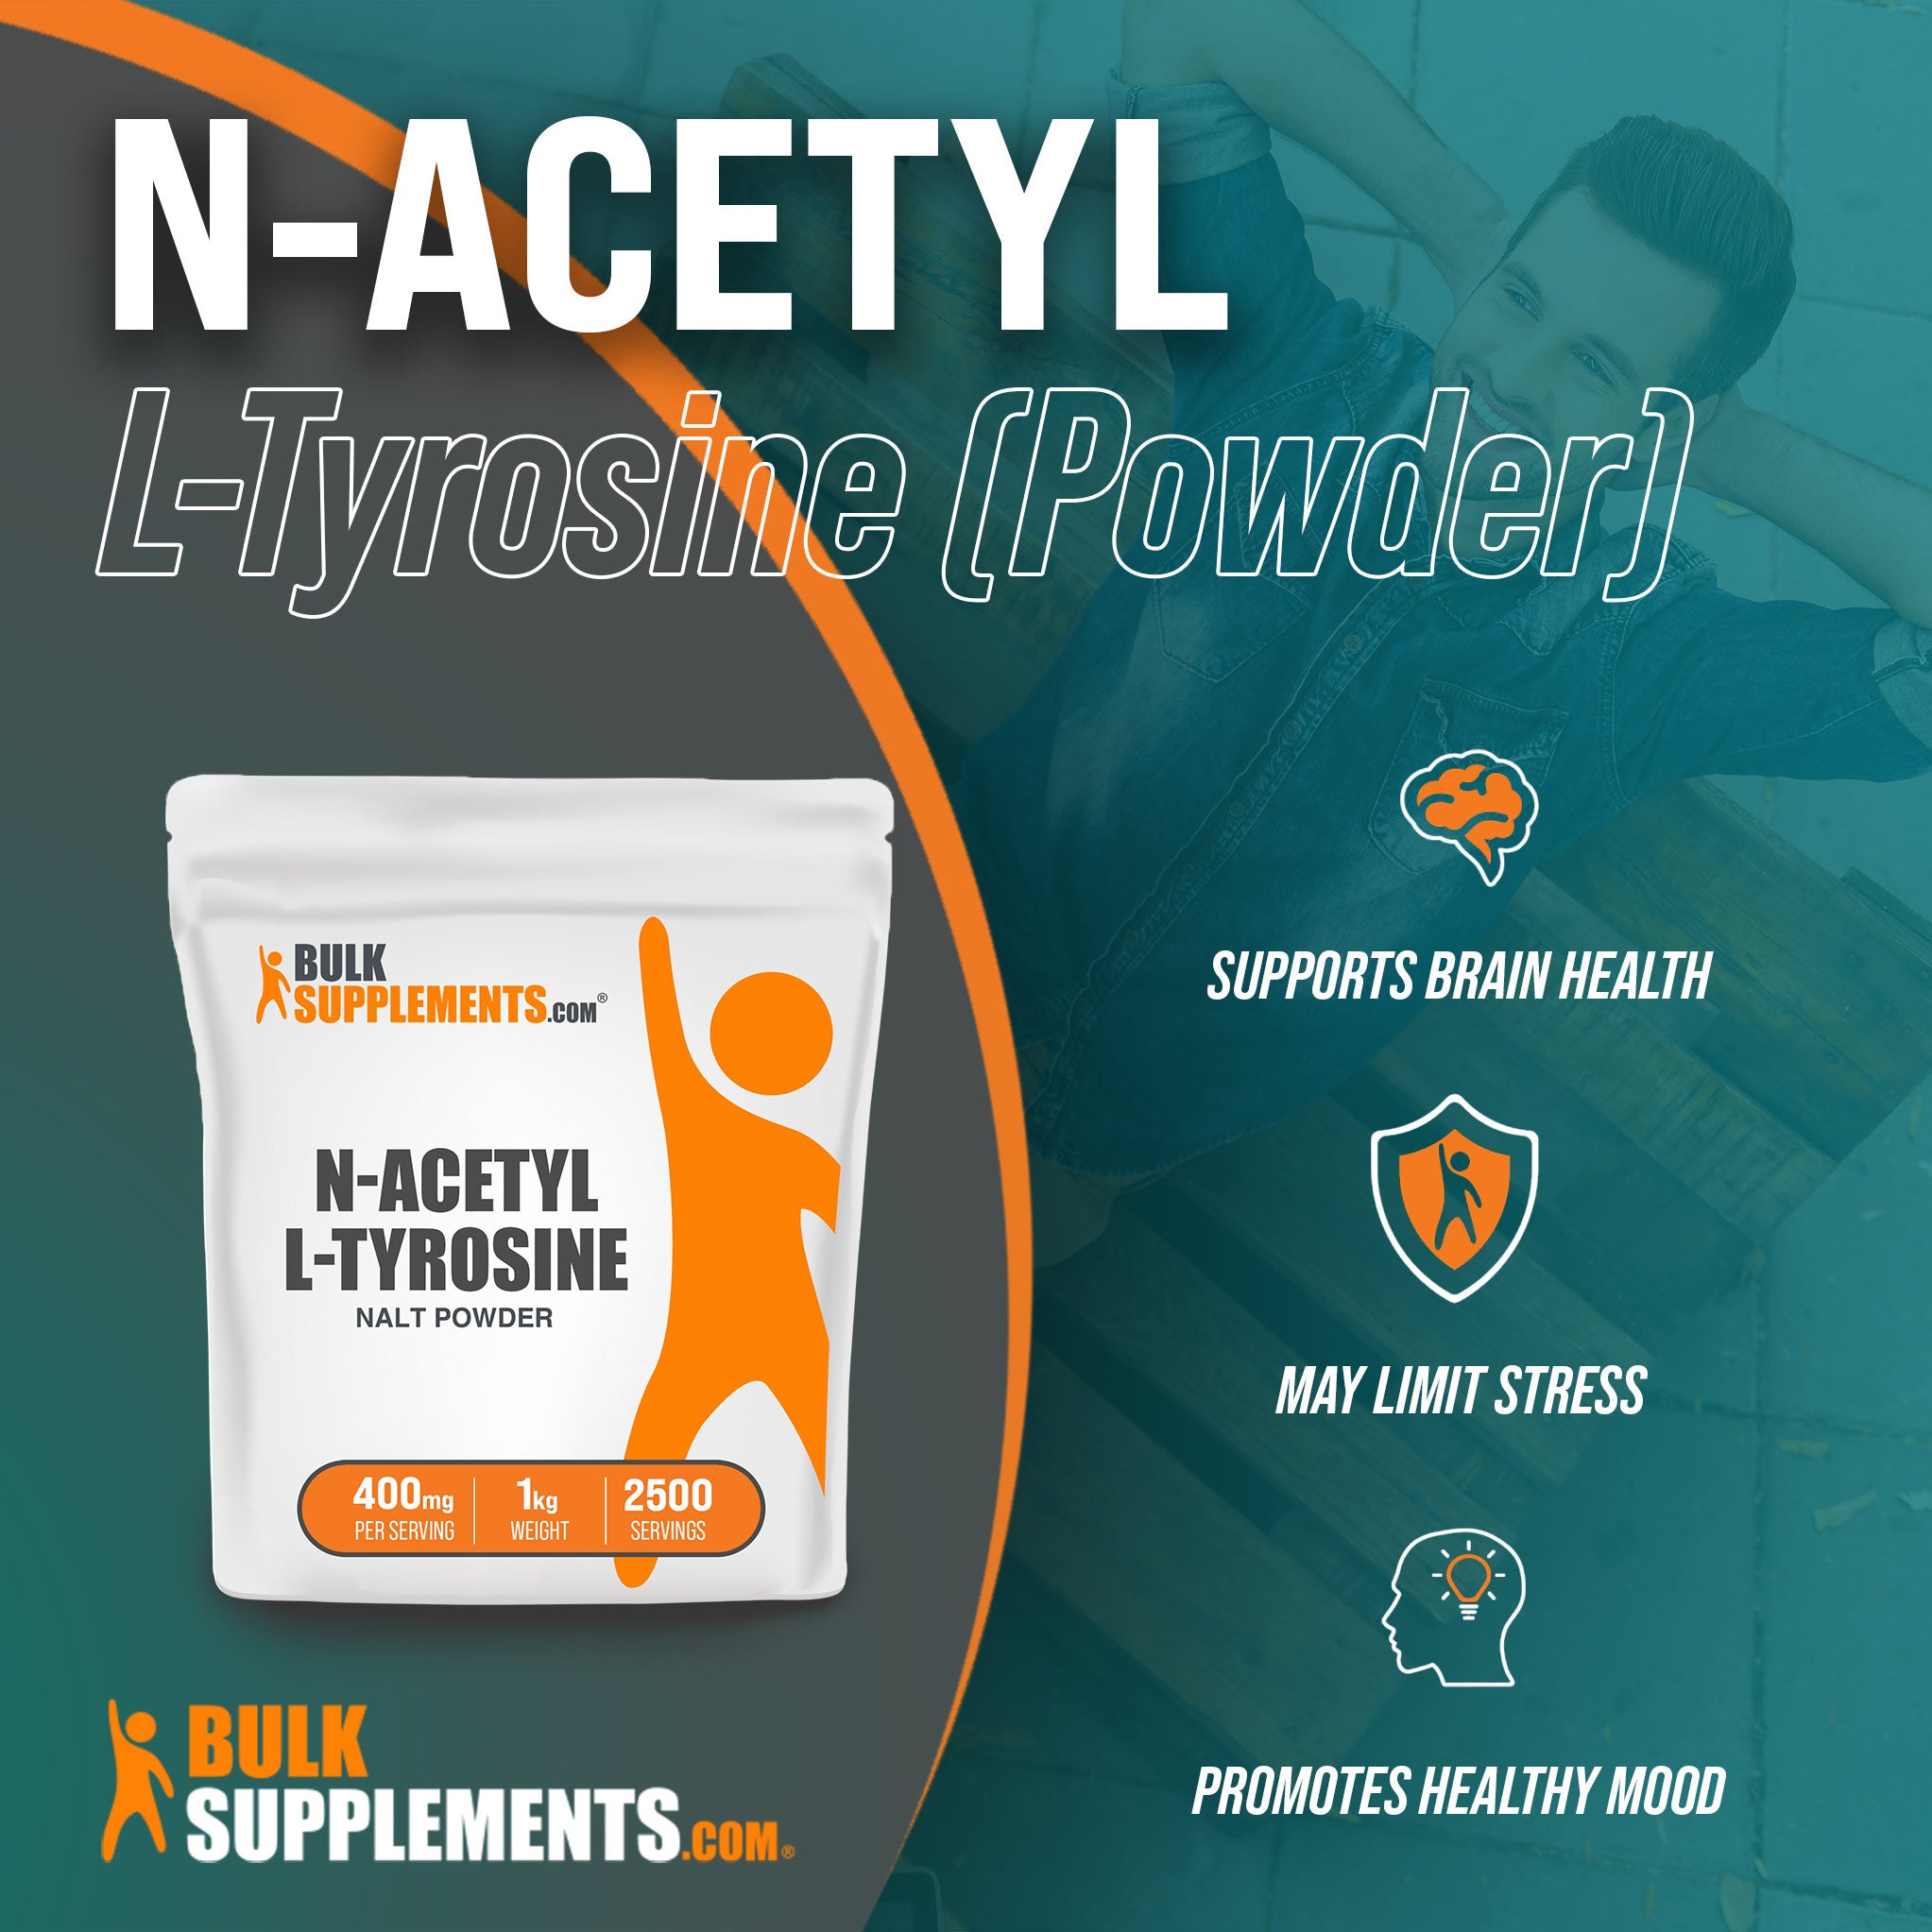 Benefits of N-Acetyl L-Tyrosine: supports brain health, may limit stress, promotes healthy mood